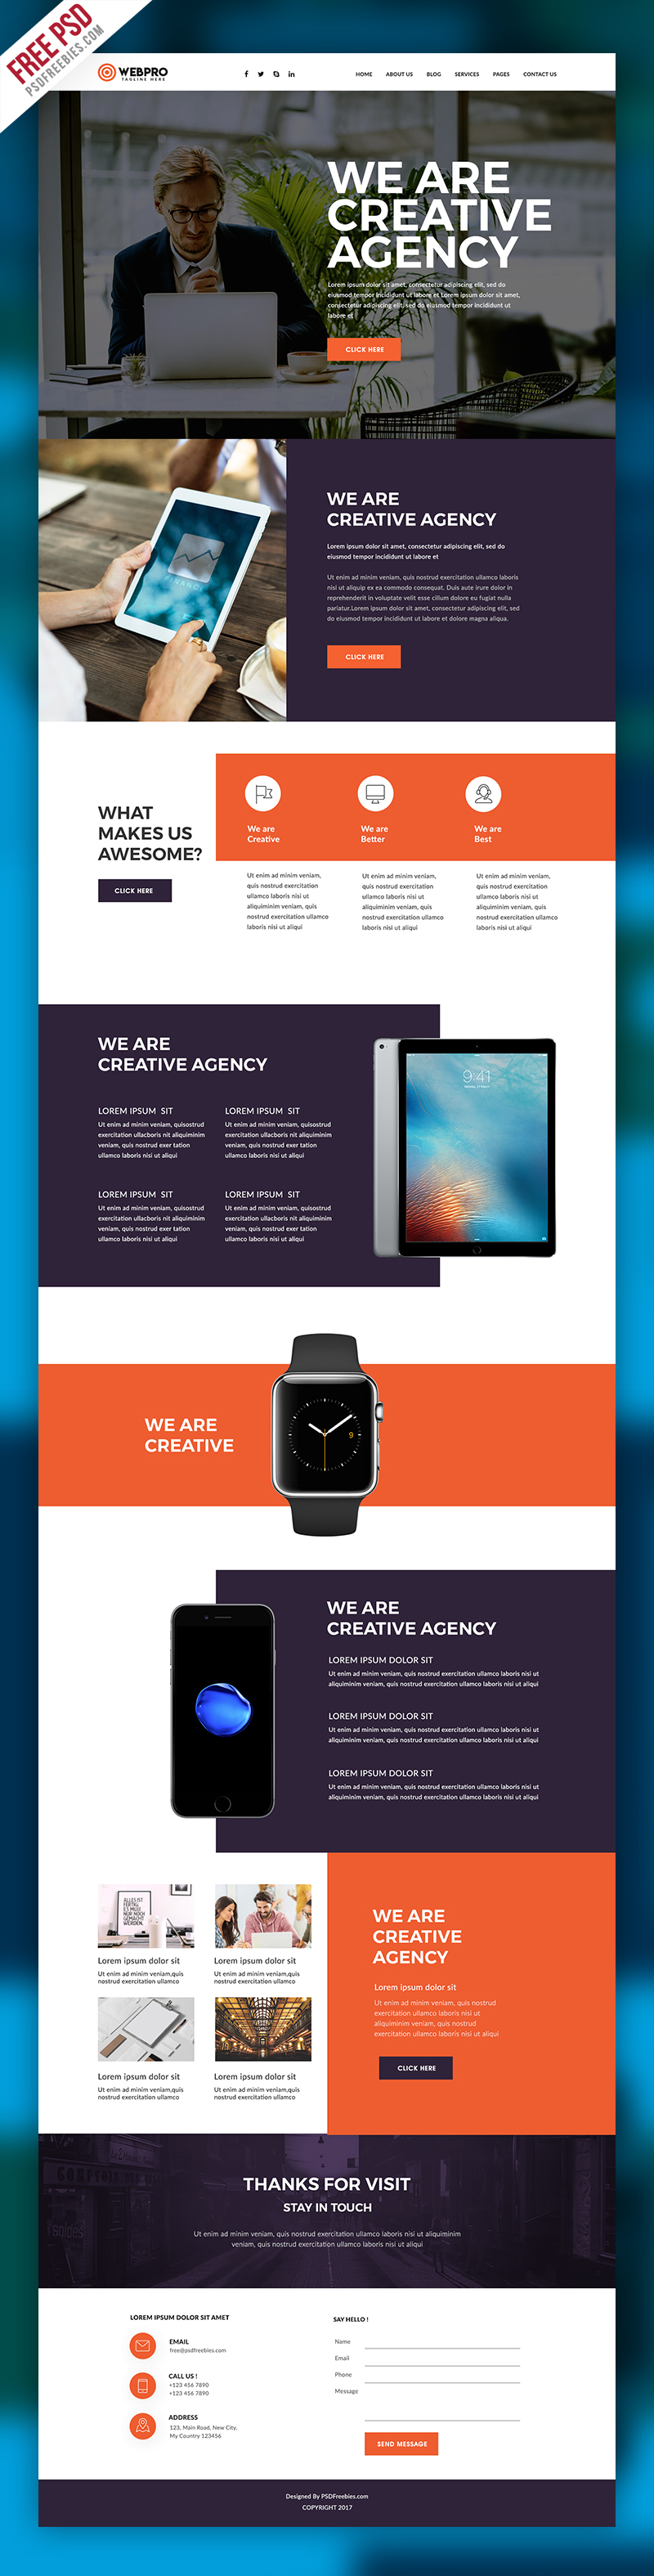 photoshop website templates psd free download